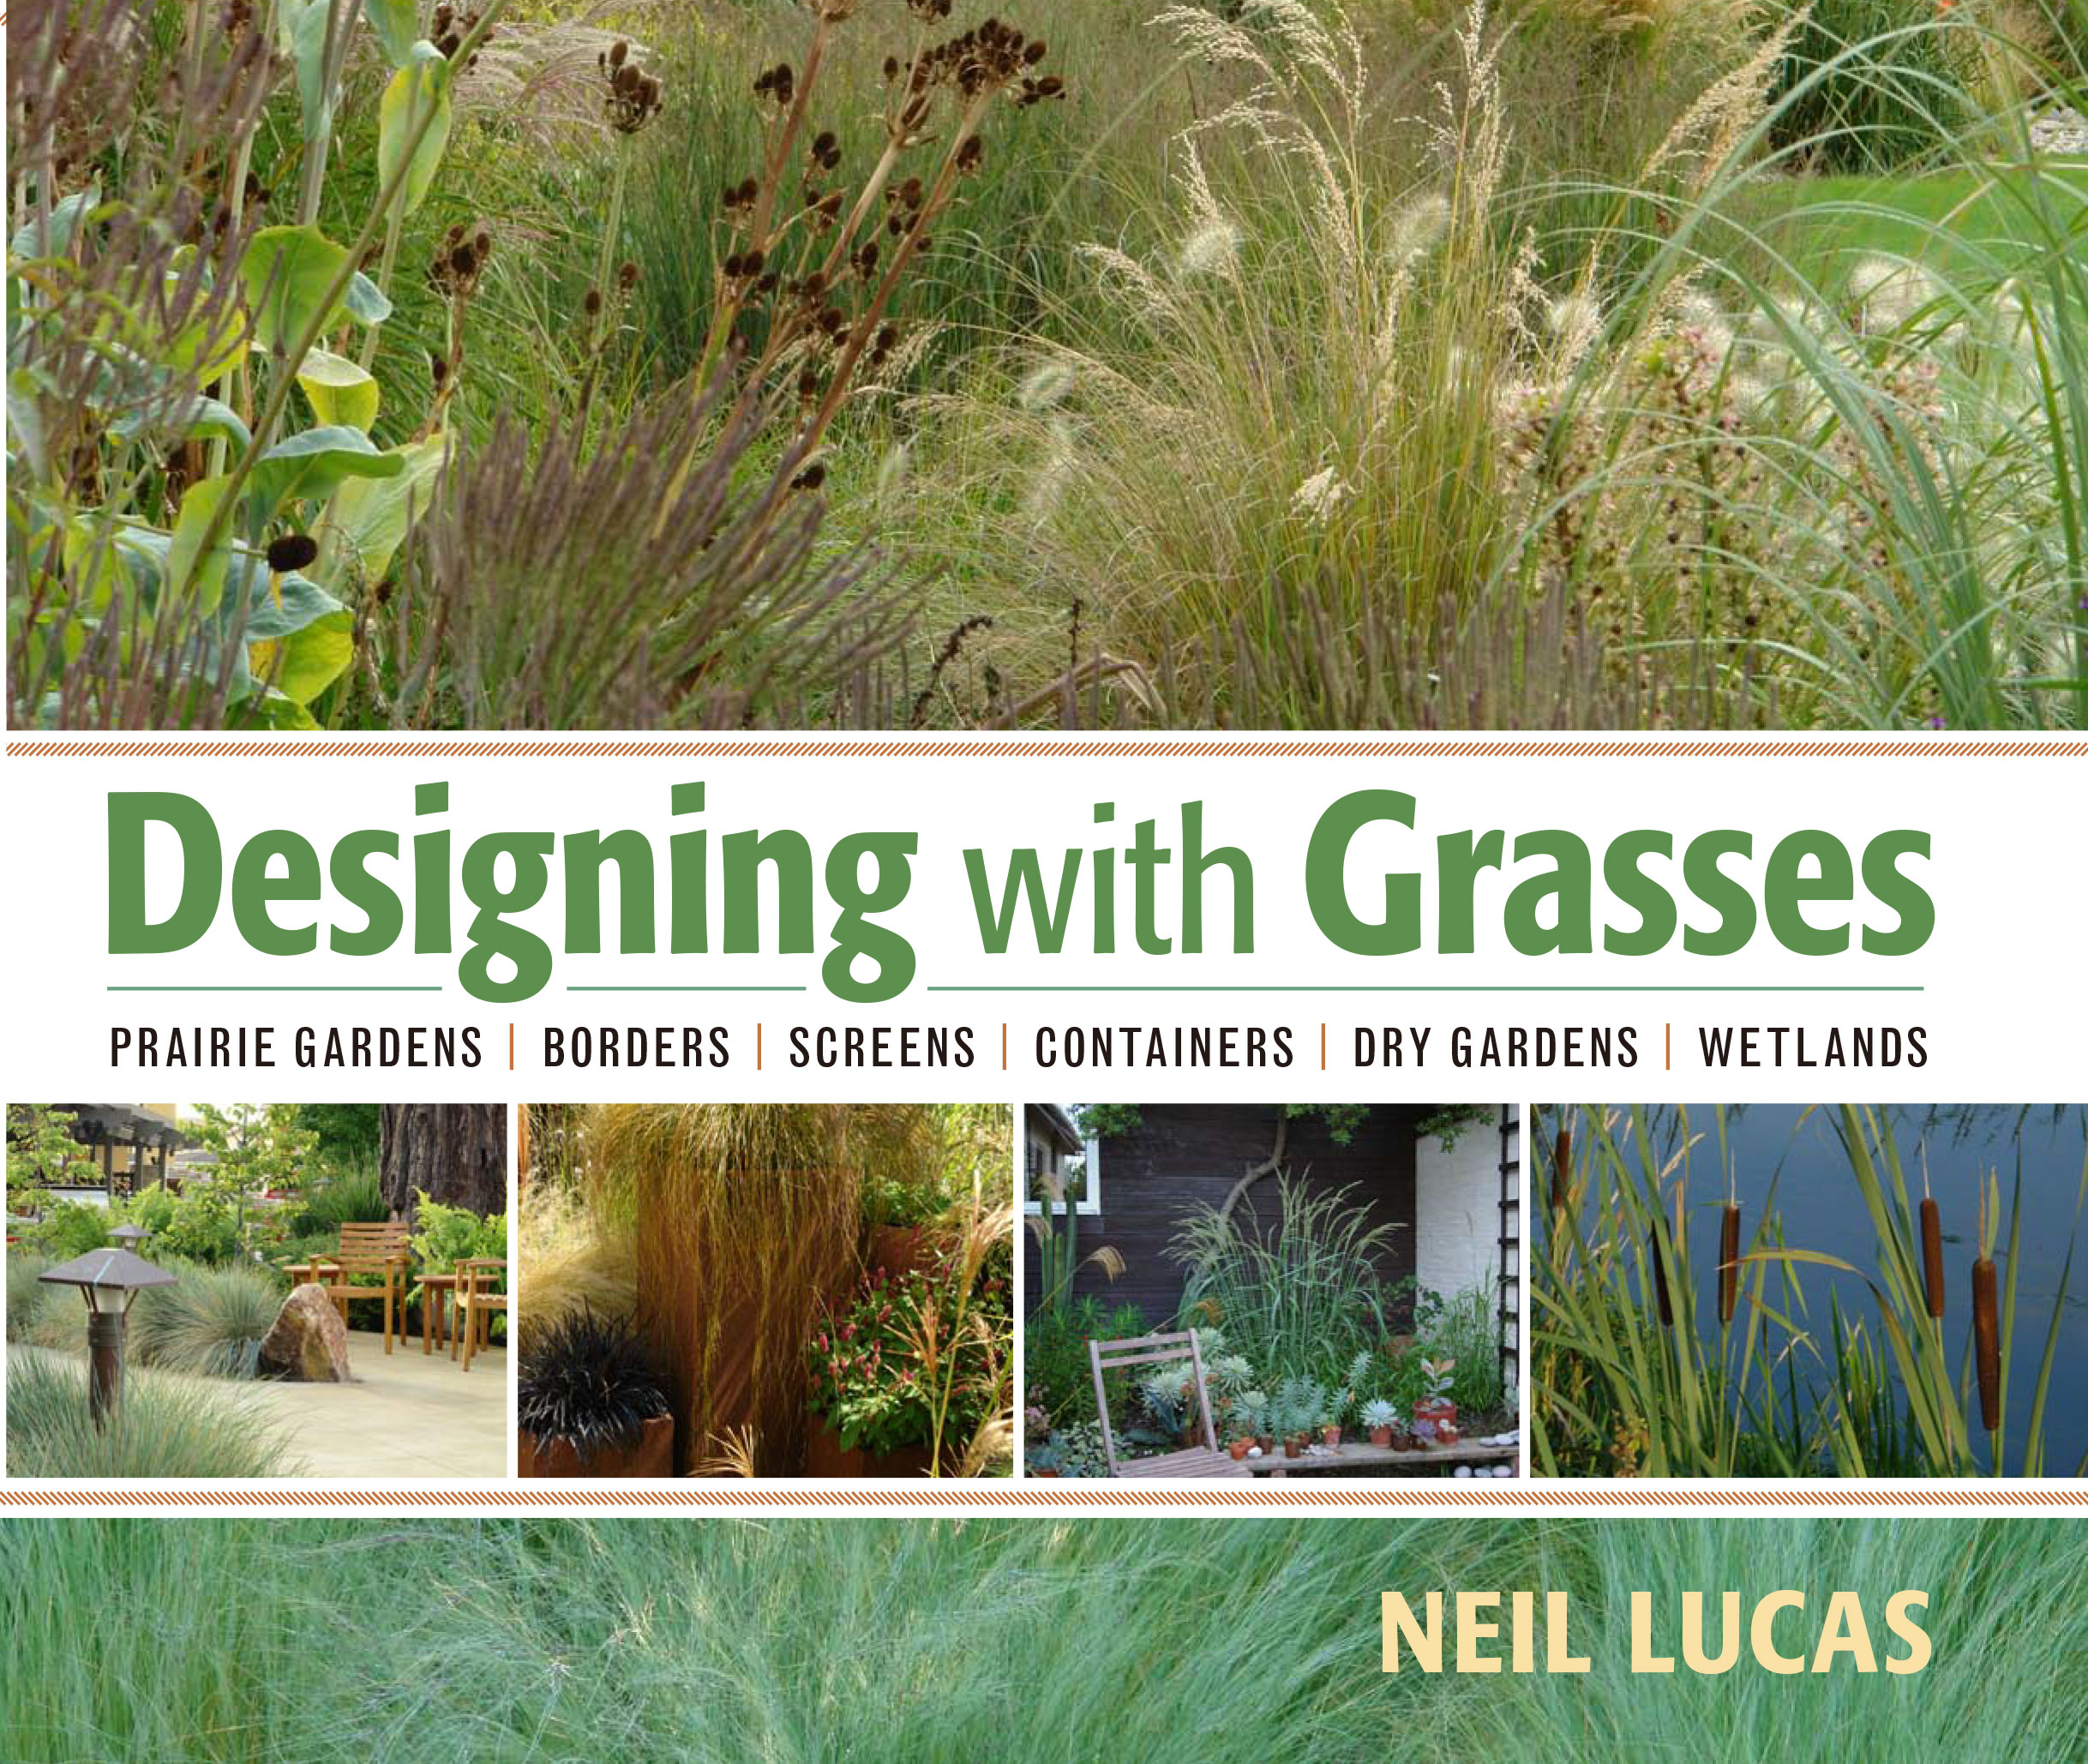 Designing with Grasses book cover